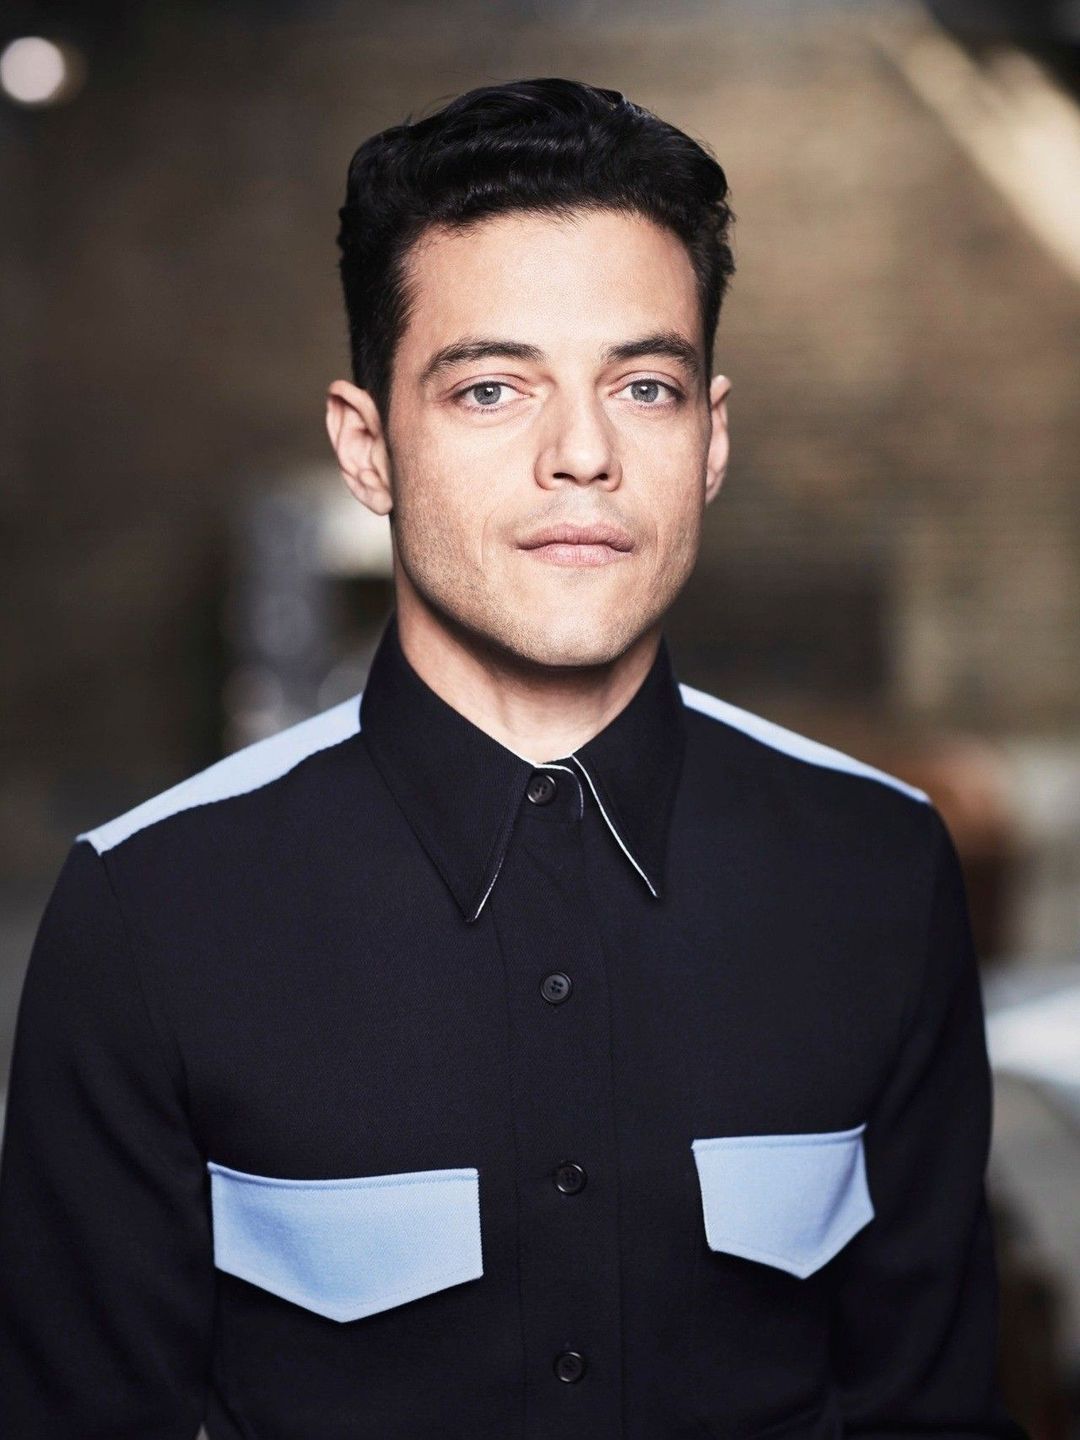 Rami Malek who is his mother